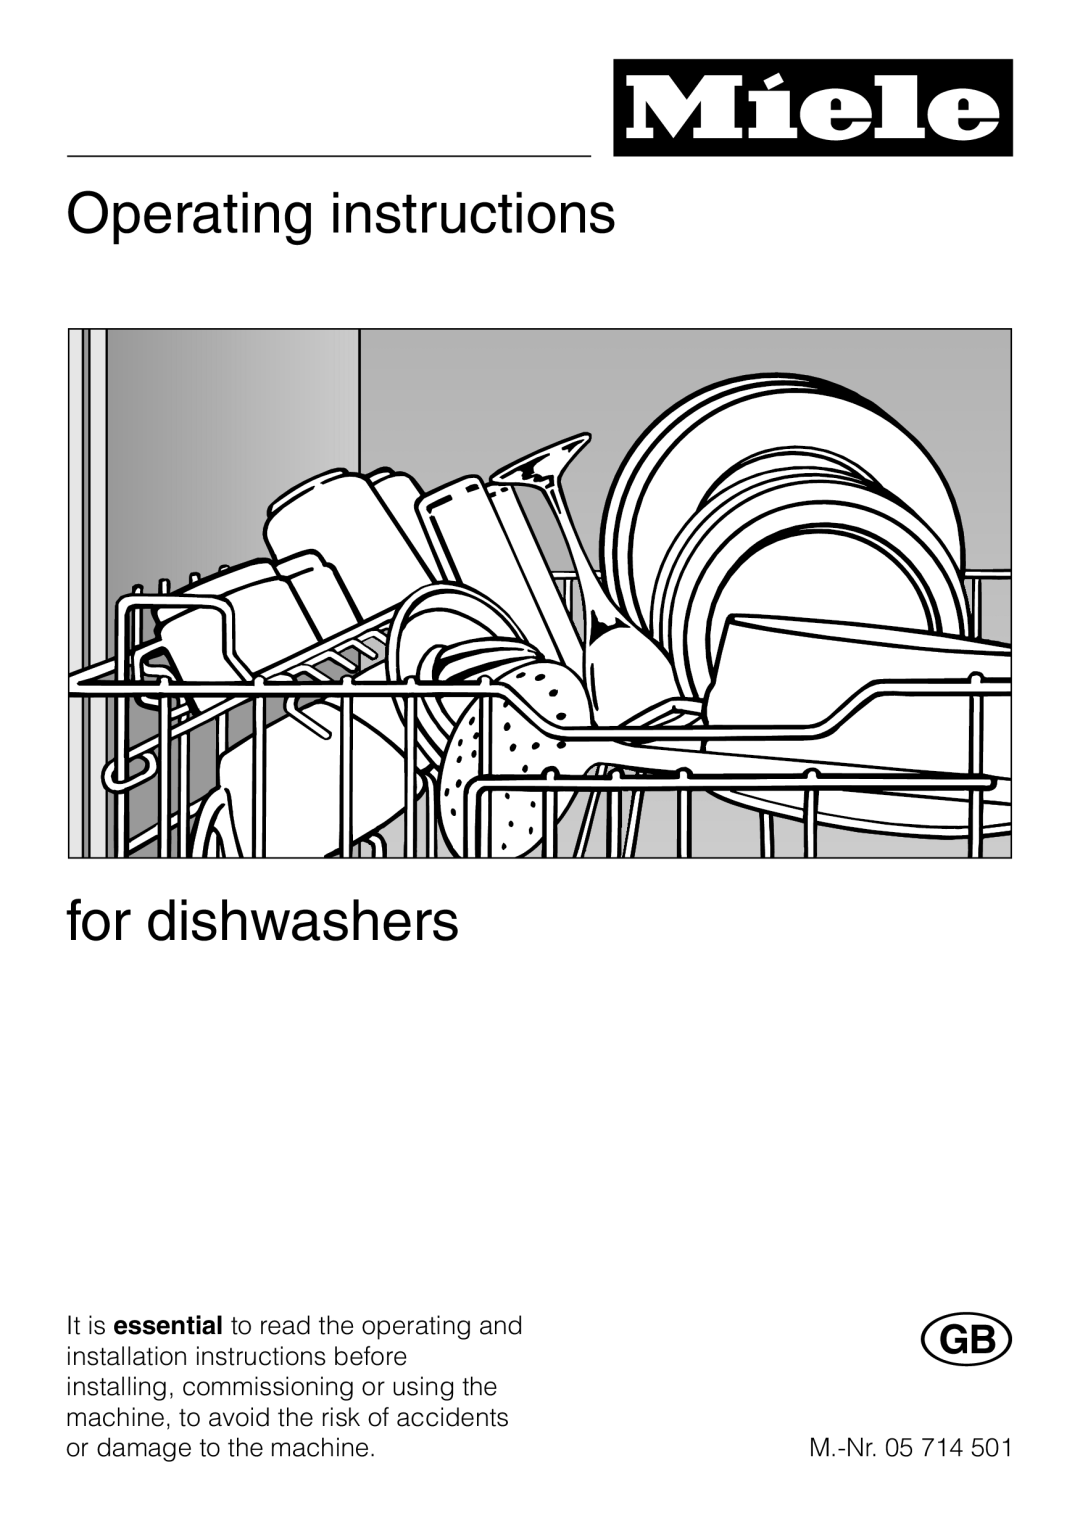 Miele installation instructions Operating instructions for dishwashers 